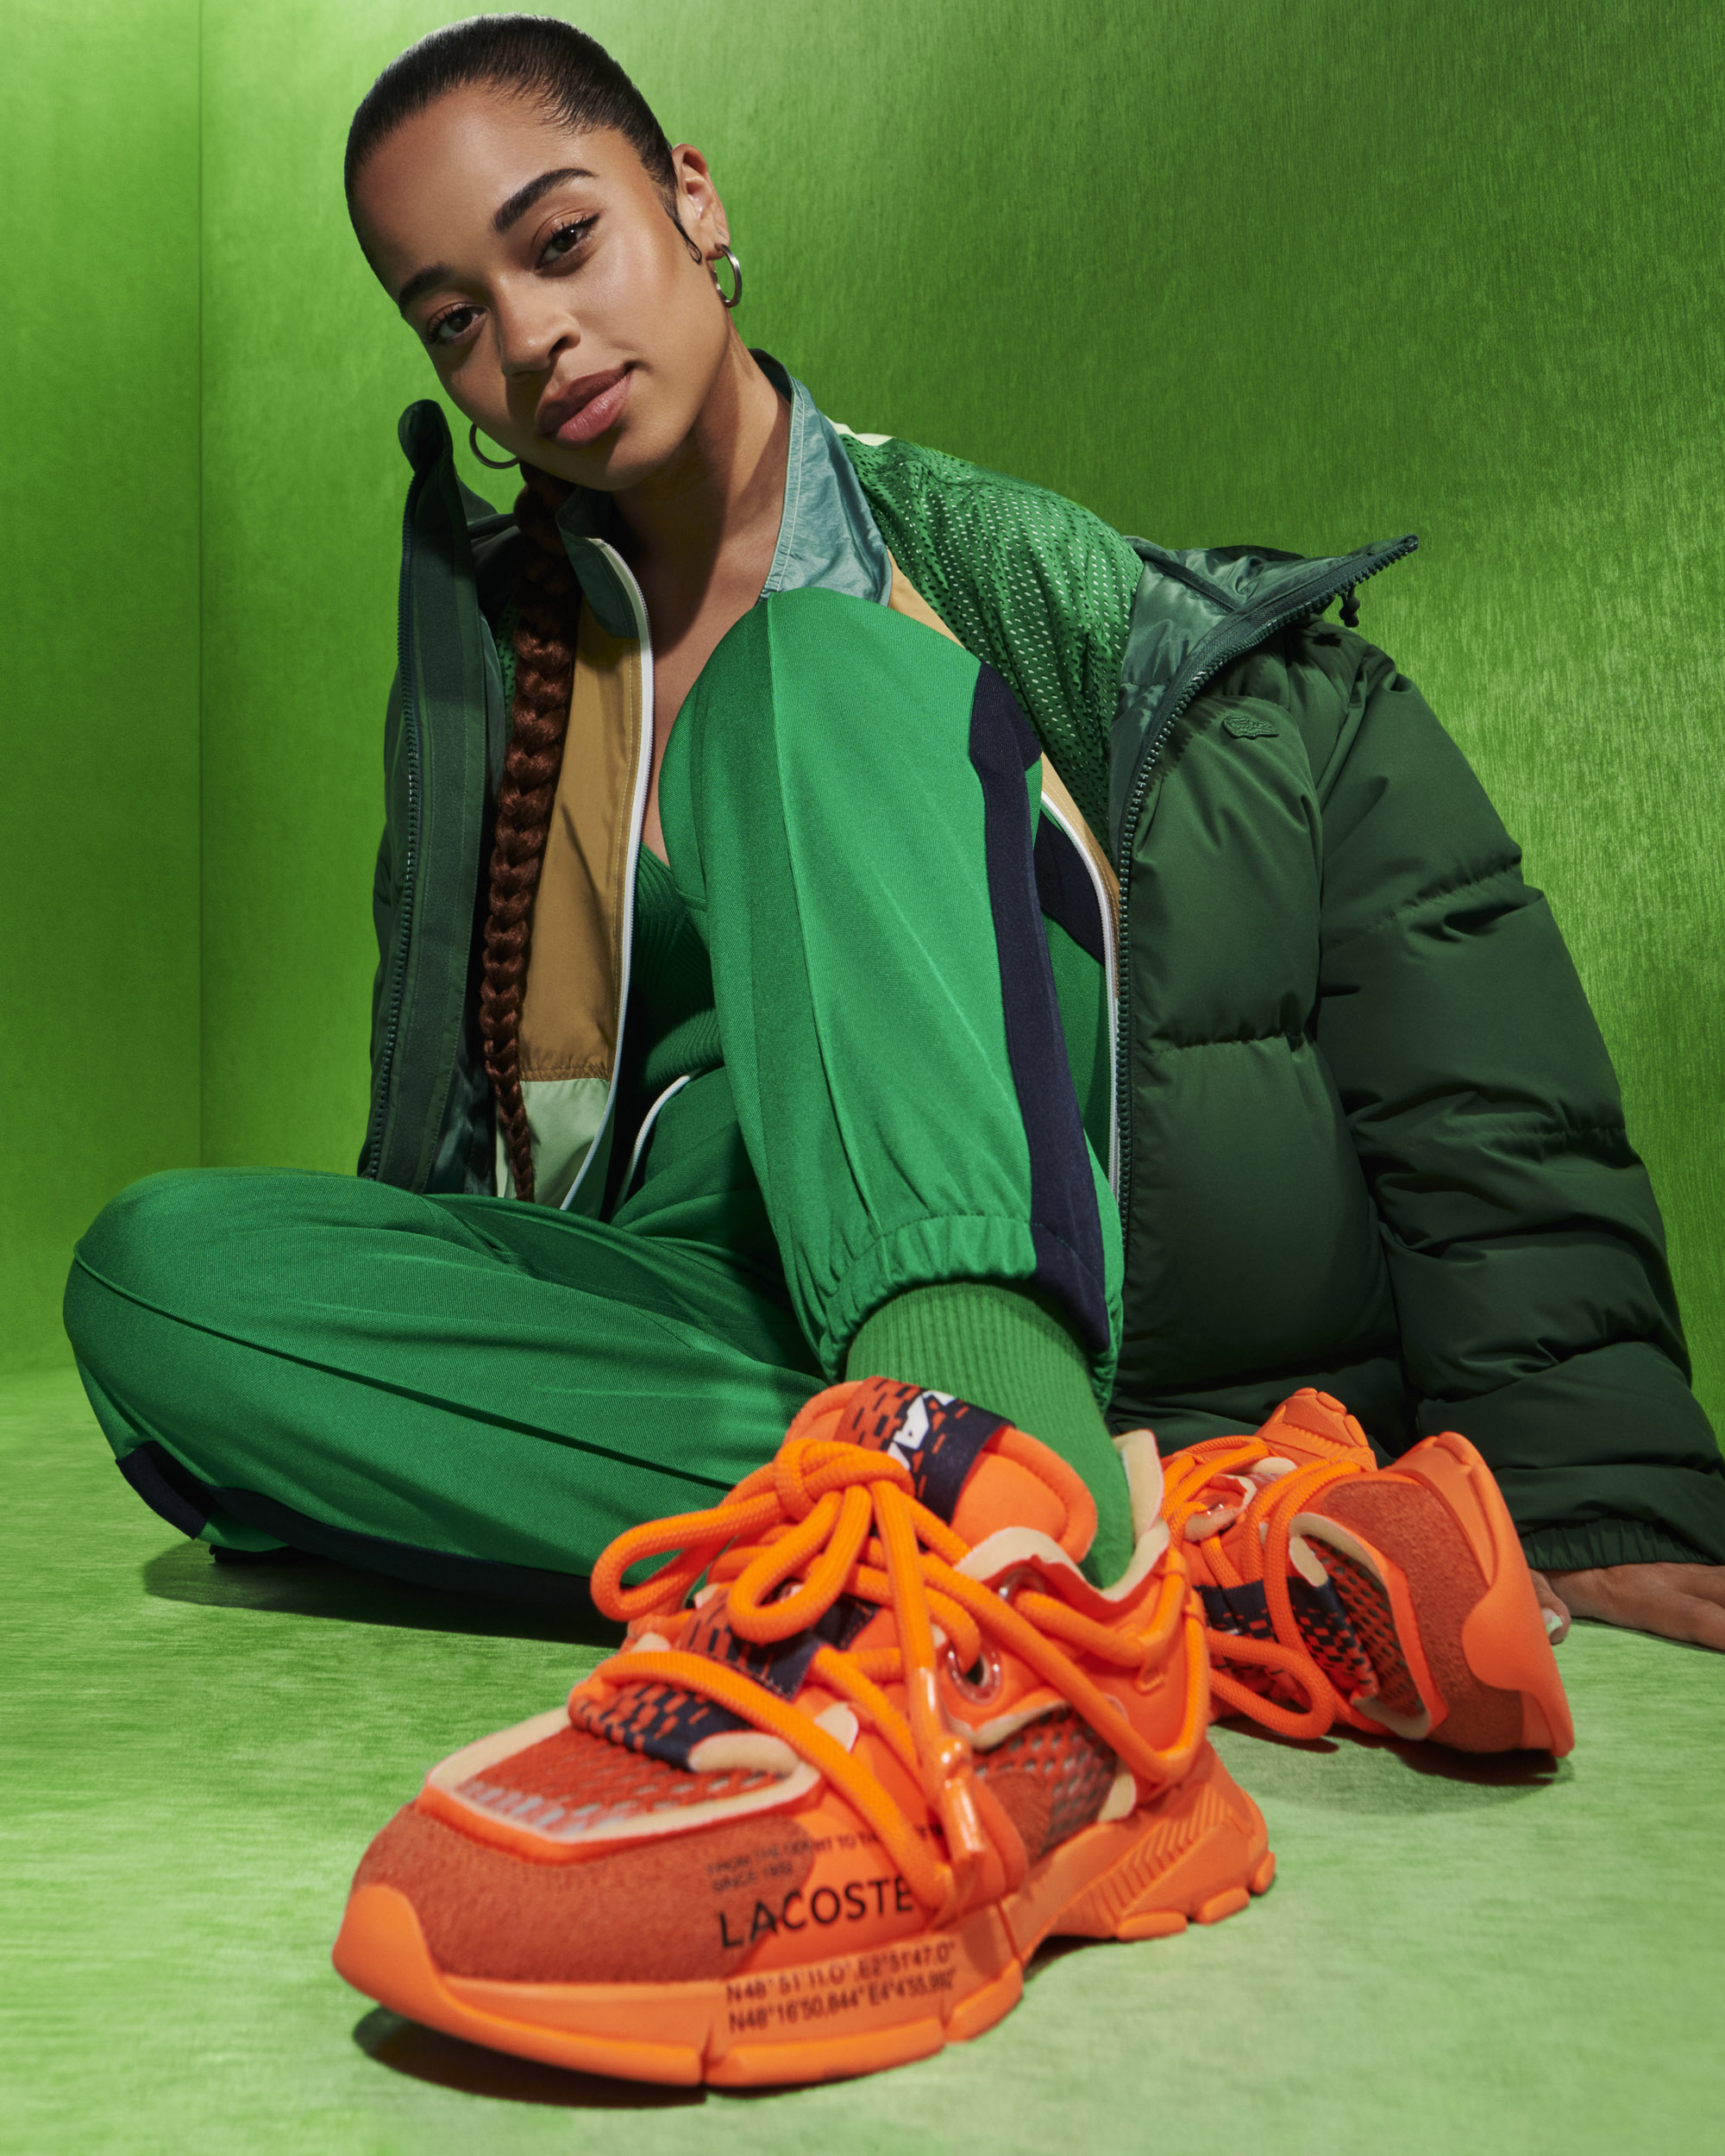 Lacoste New Footwear a Paves Its Legacy for Path